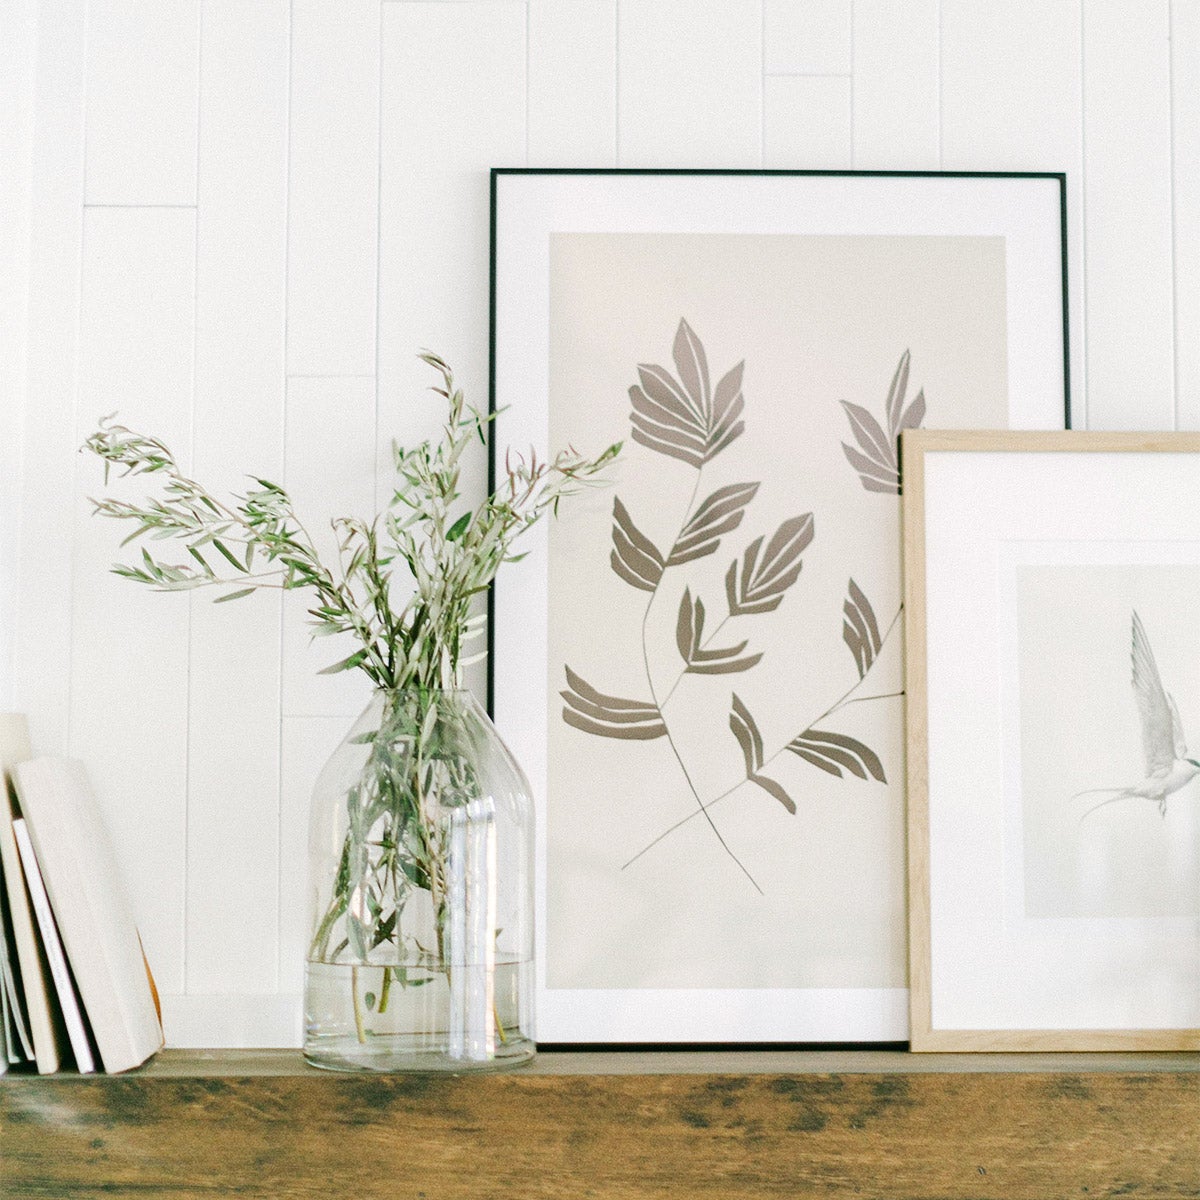 Two frames layered on mantle next to vase of foliage